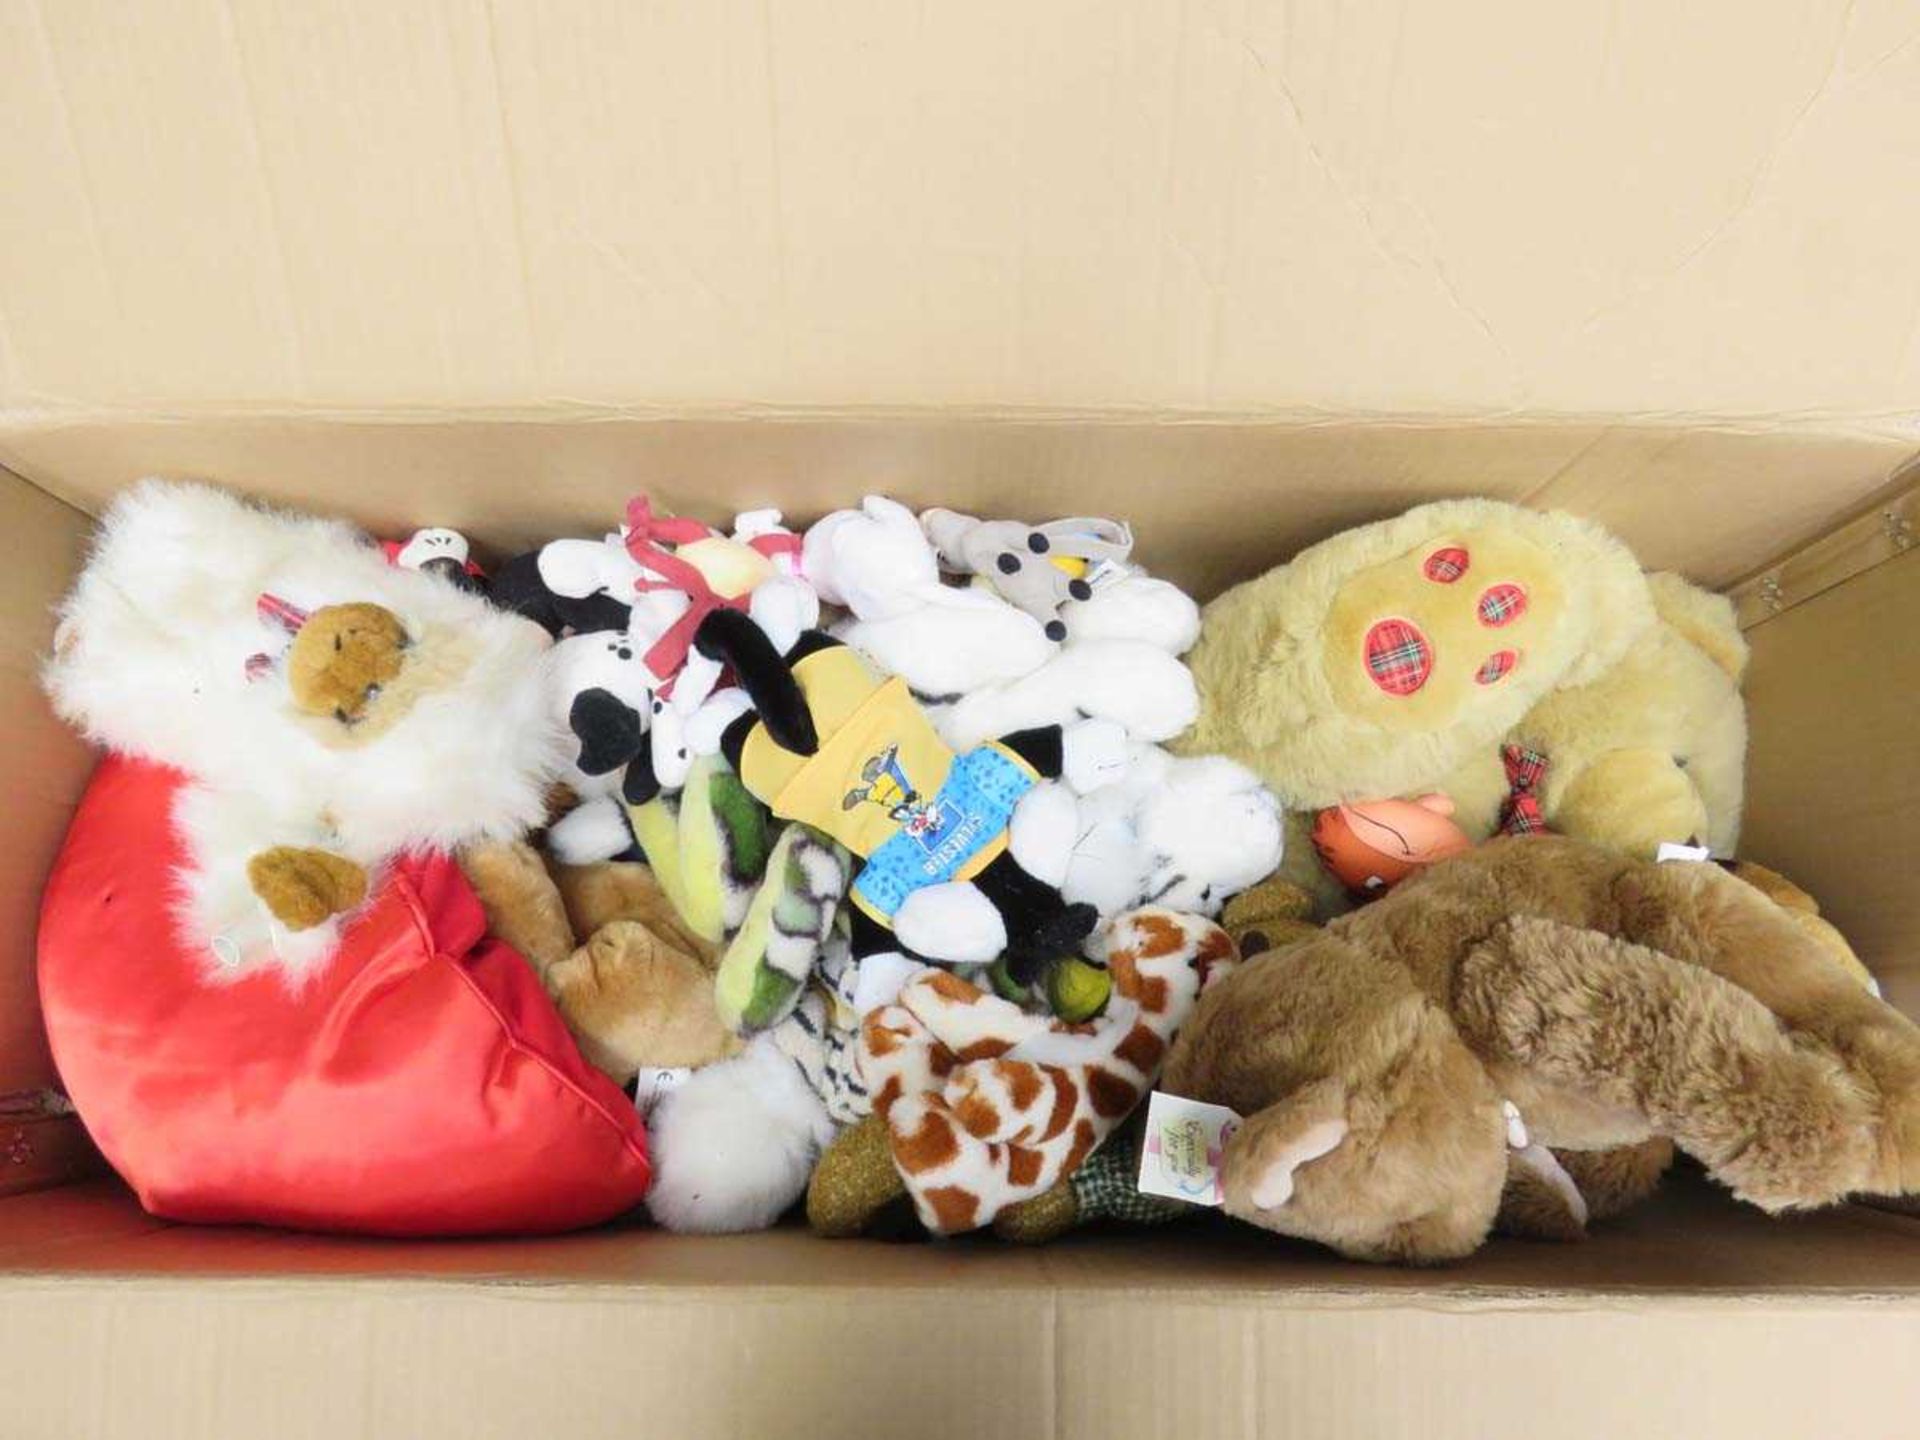 Large box containing various stuffed cuddly toys